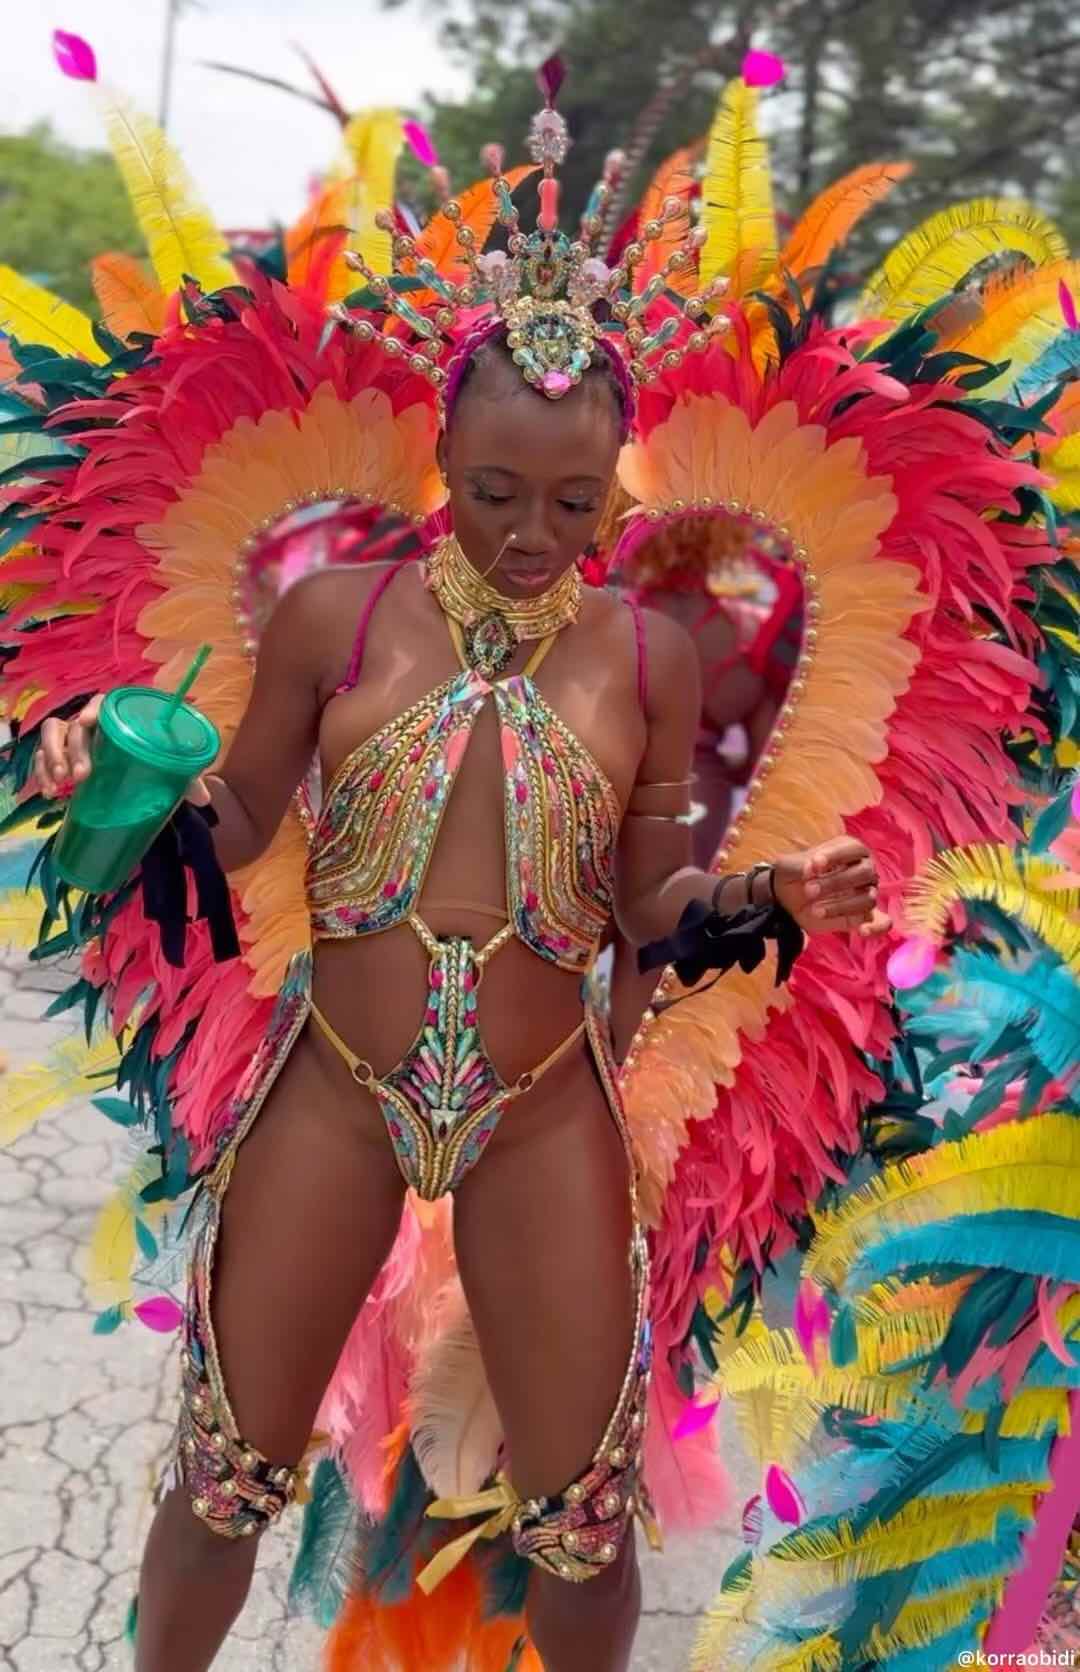 Korra Obidi blasted over unclad carnival outfit, suggestive dance